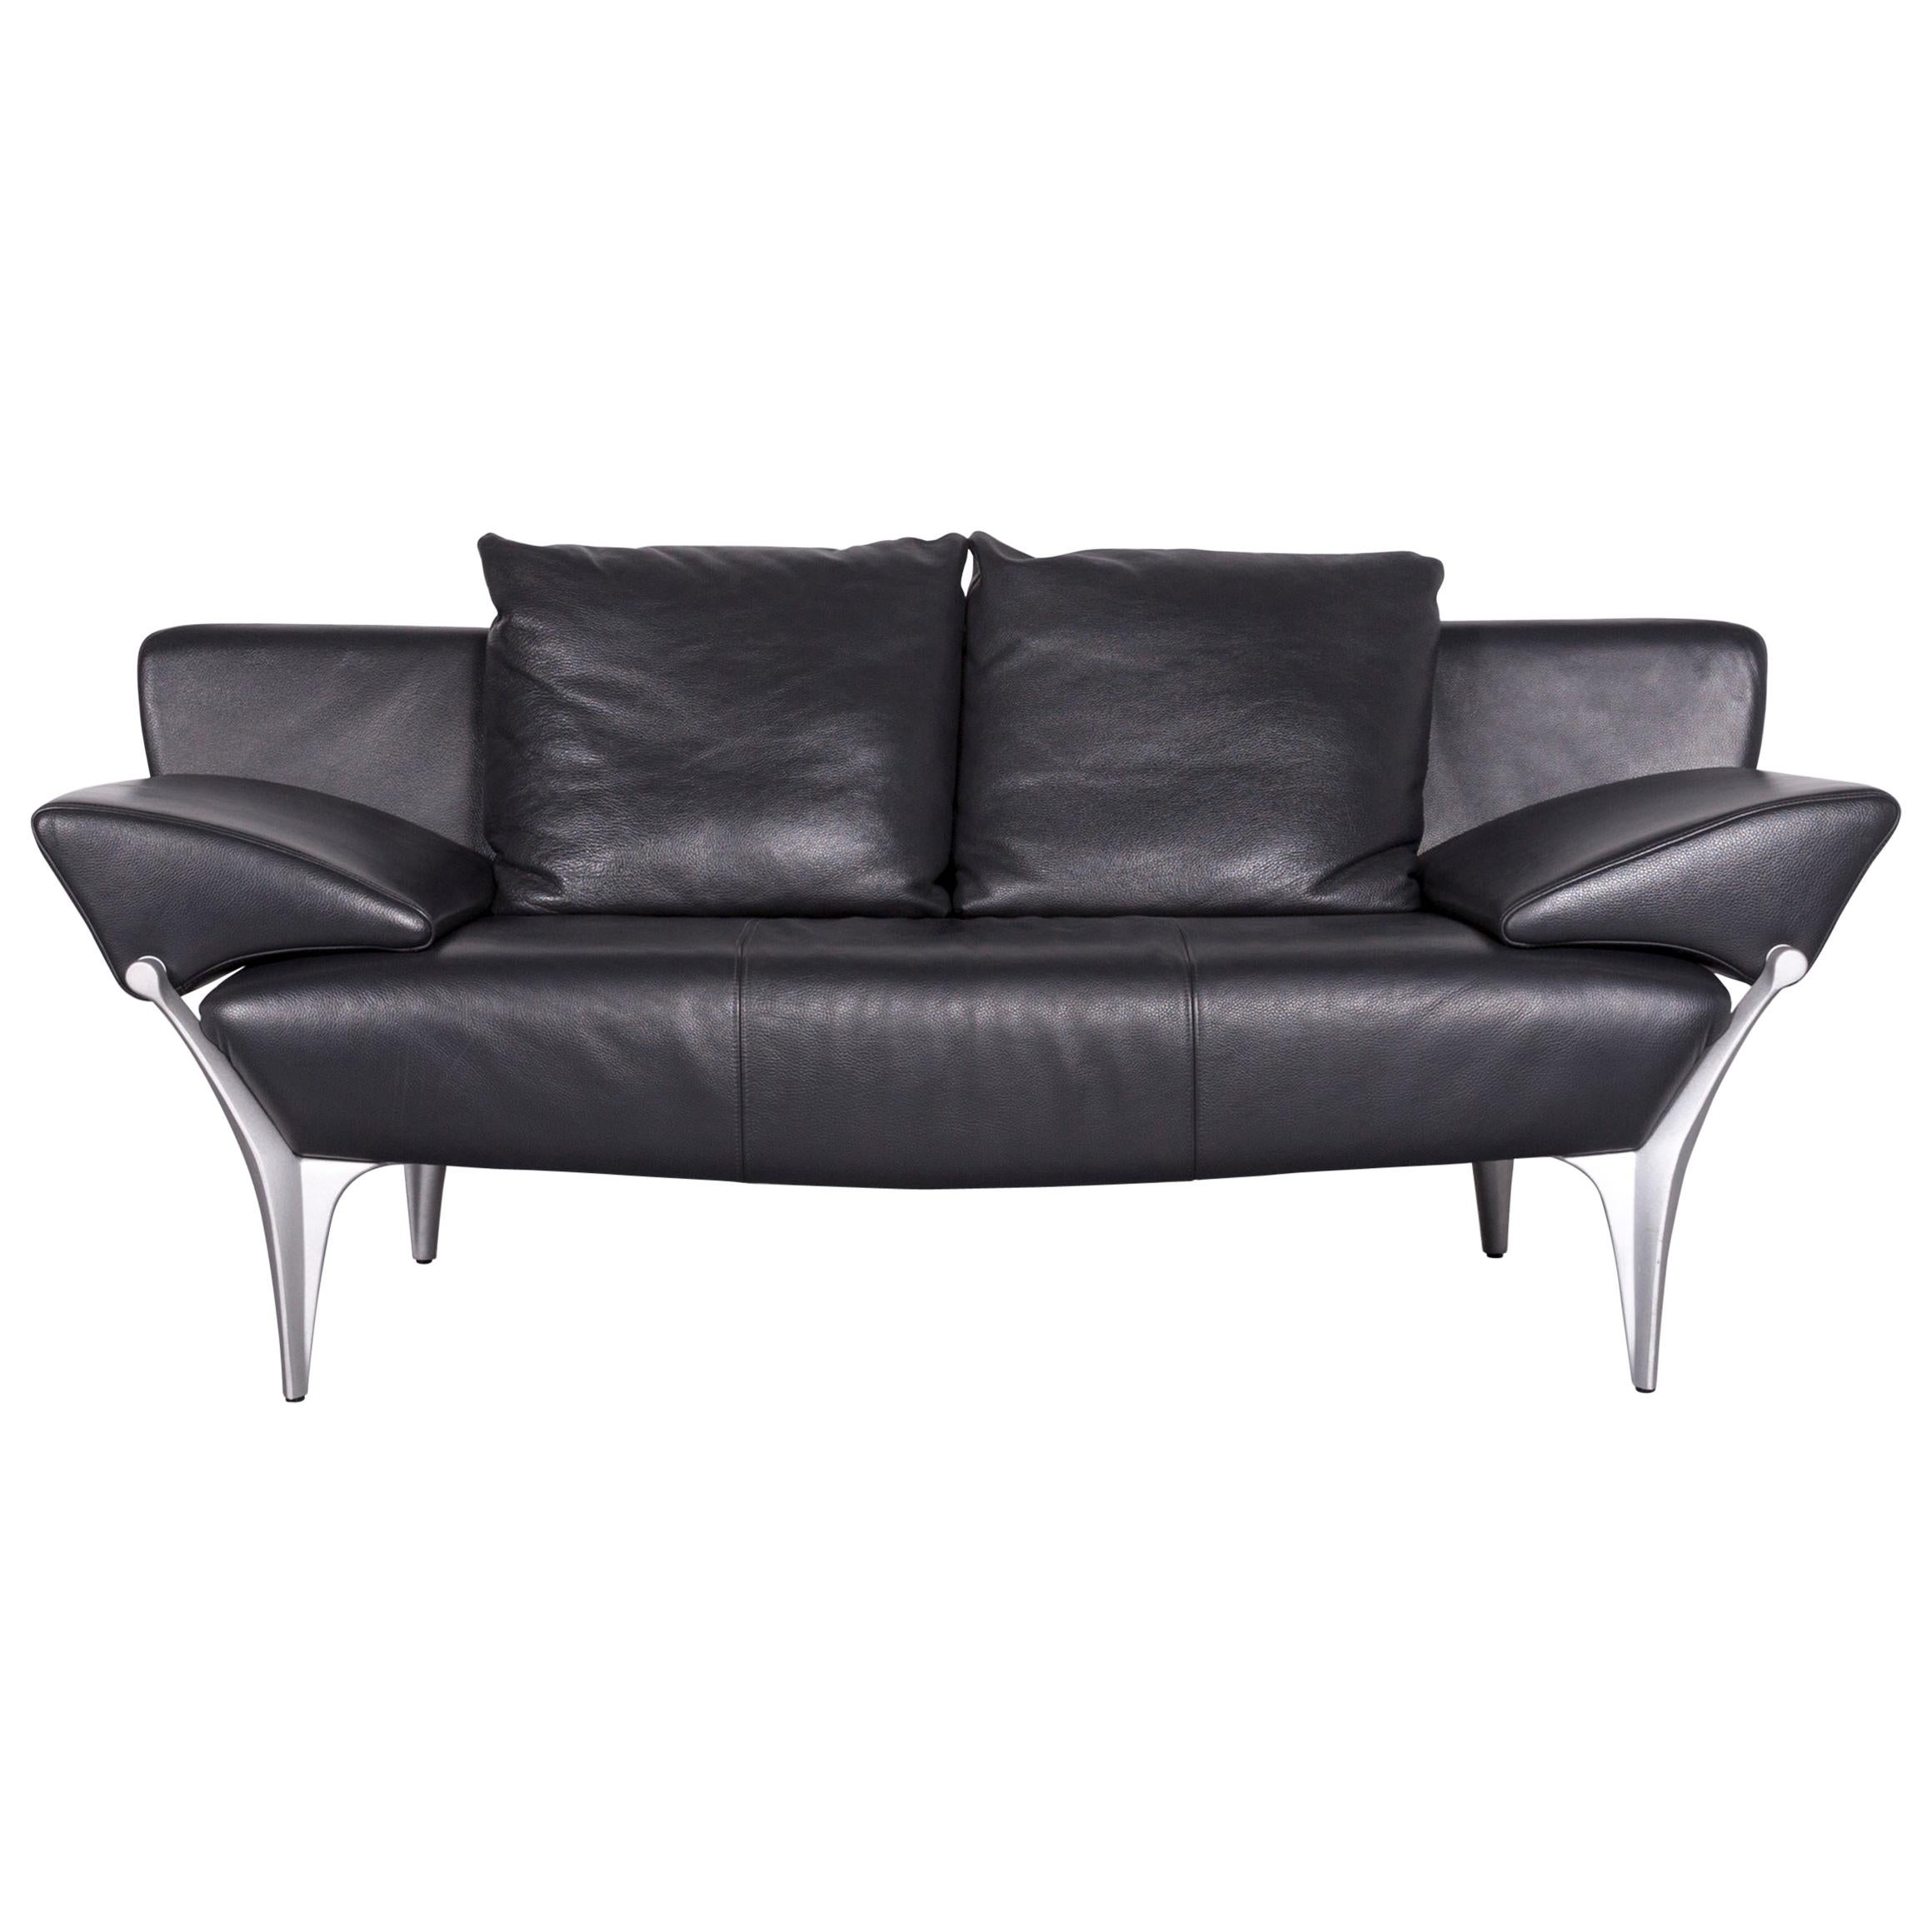 Rolf Benz 1600 Designer Leather Sofa Black Two-Seat Couch